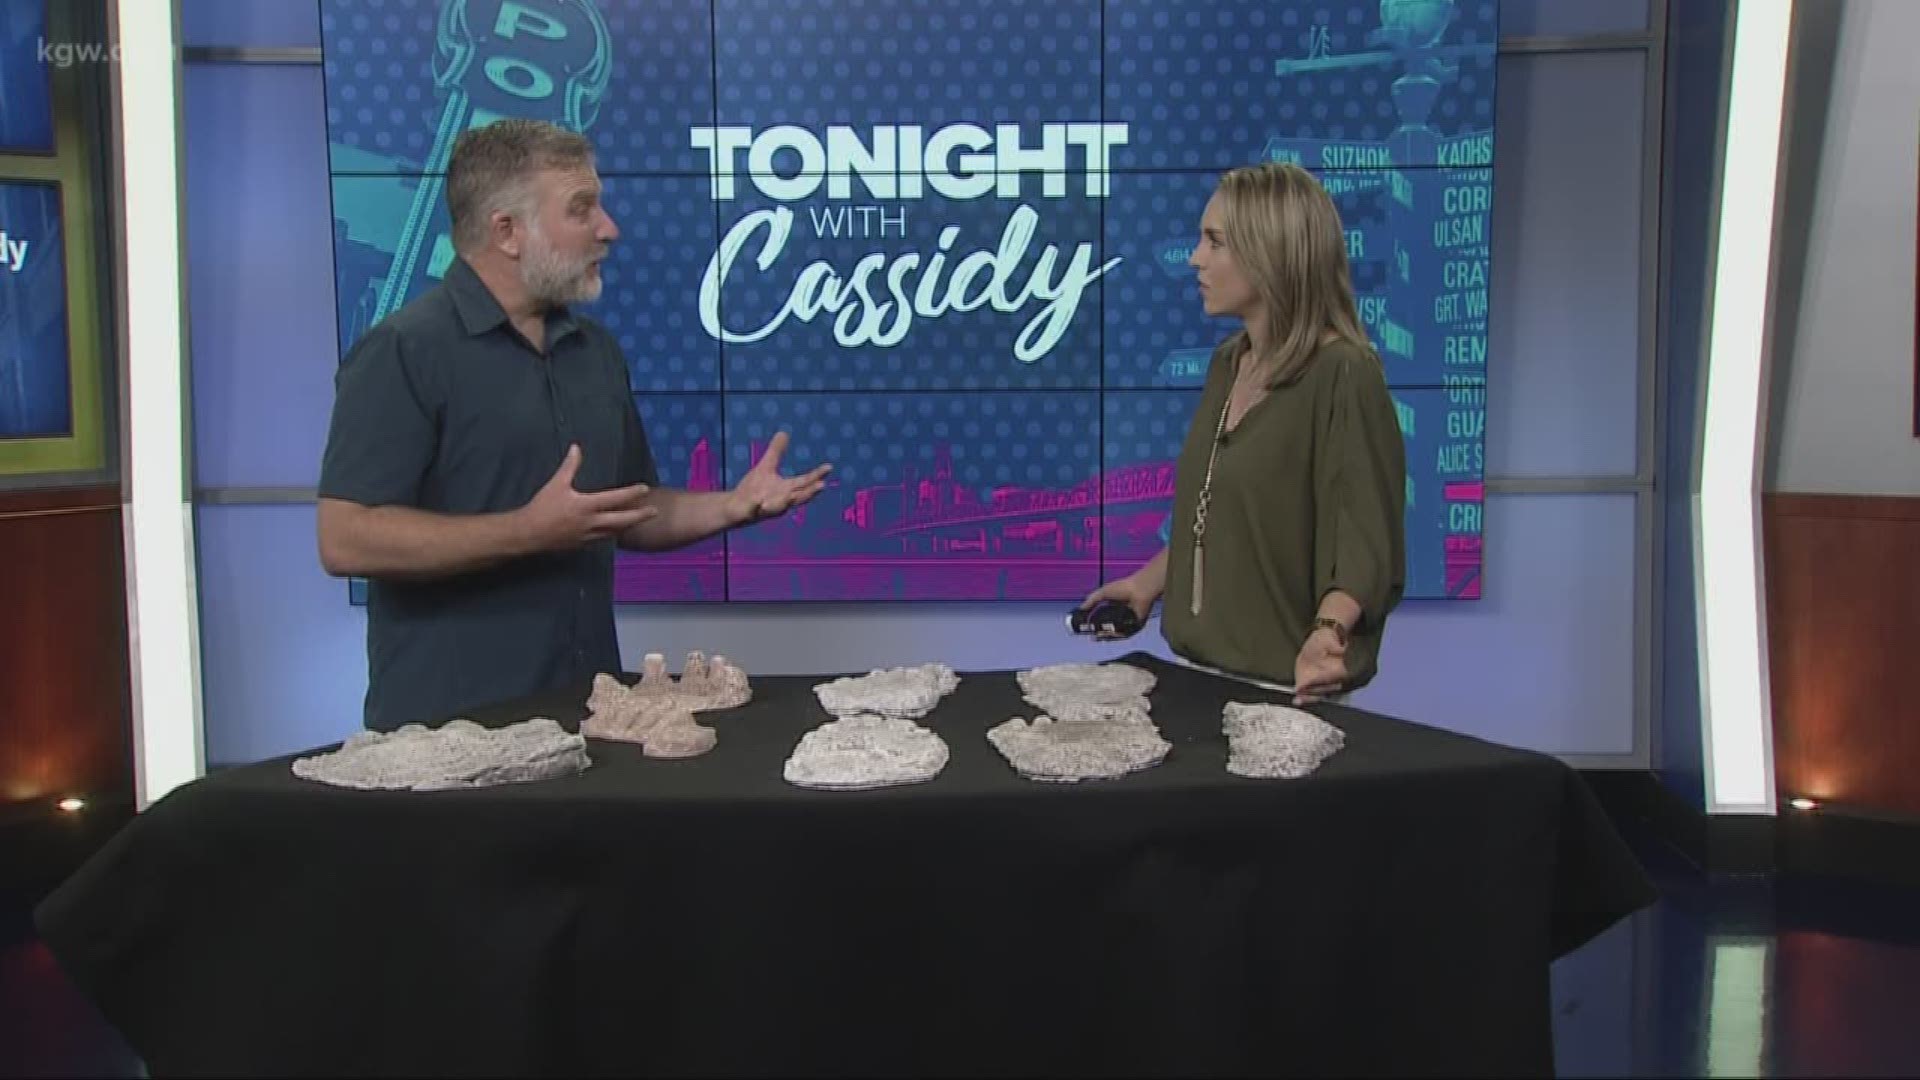 The 2nd annual Oregon bigfoot Festival is this weekend. So we talked to Cliff Barackman, a researcher from the Animal Planet show "Finding Bigfoot," to see what kind of evidence he has.
#TonightwithCassidy